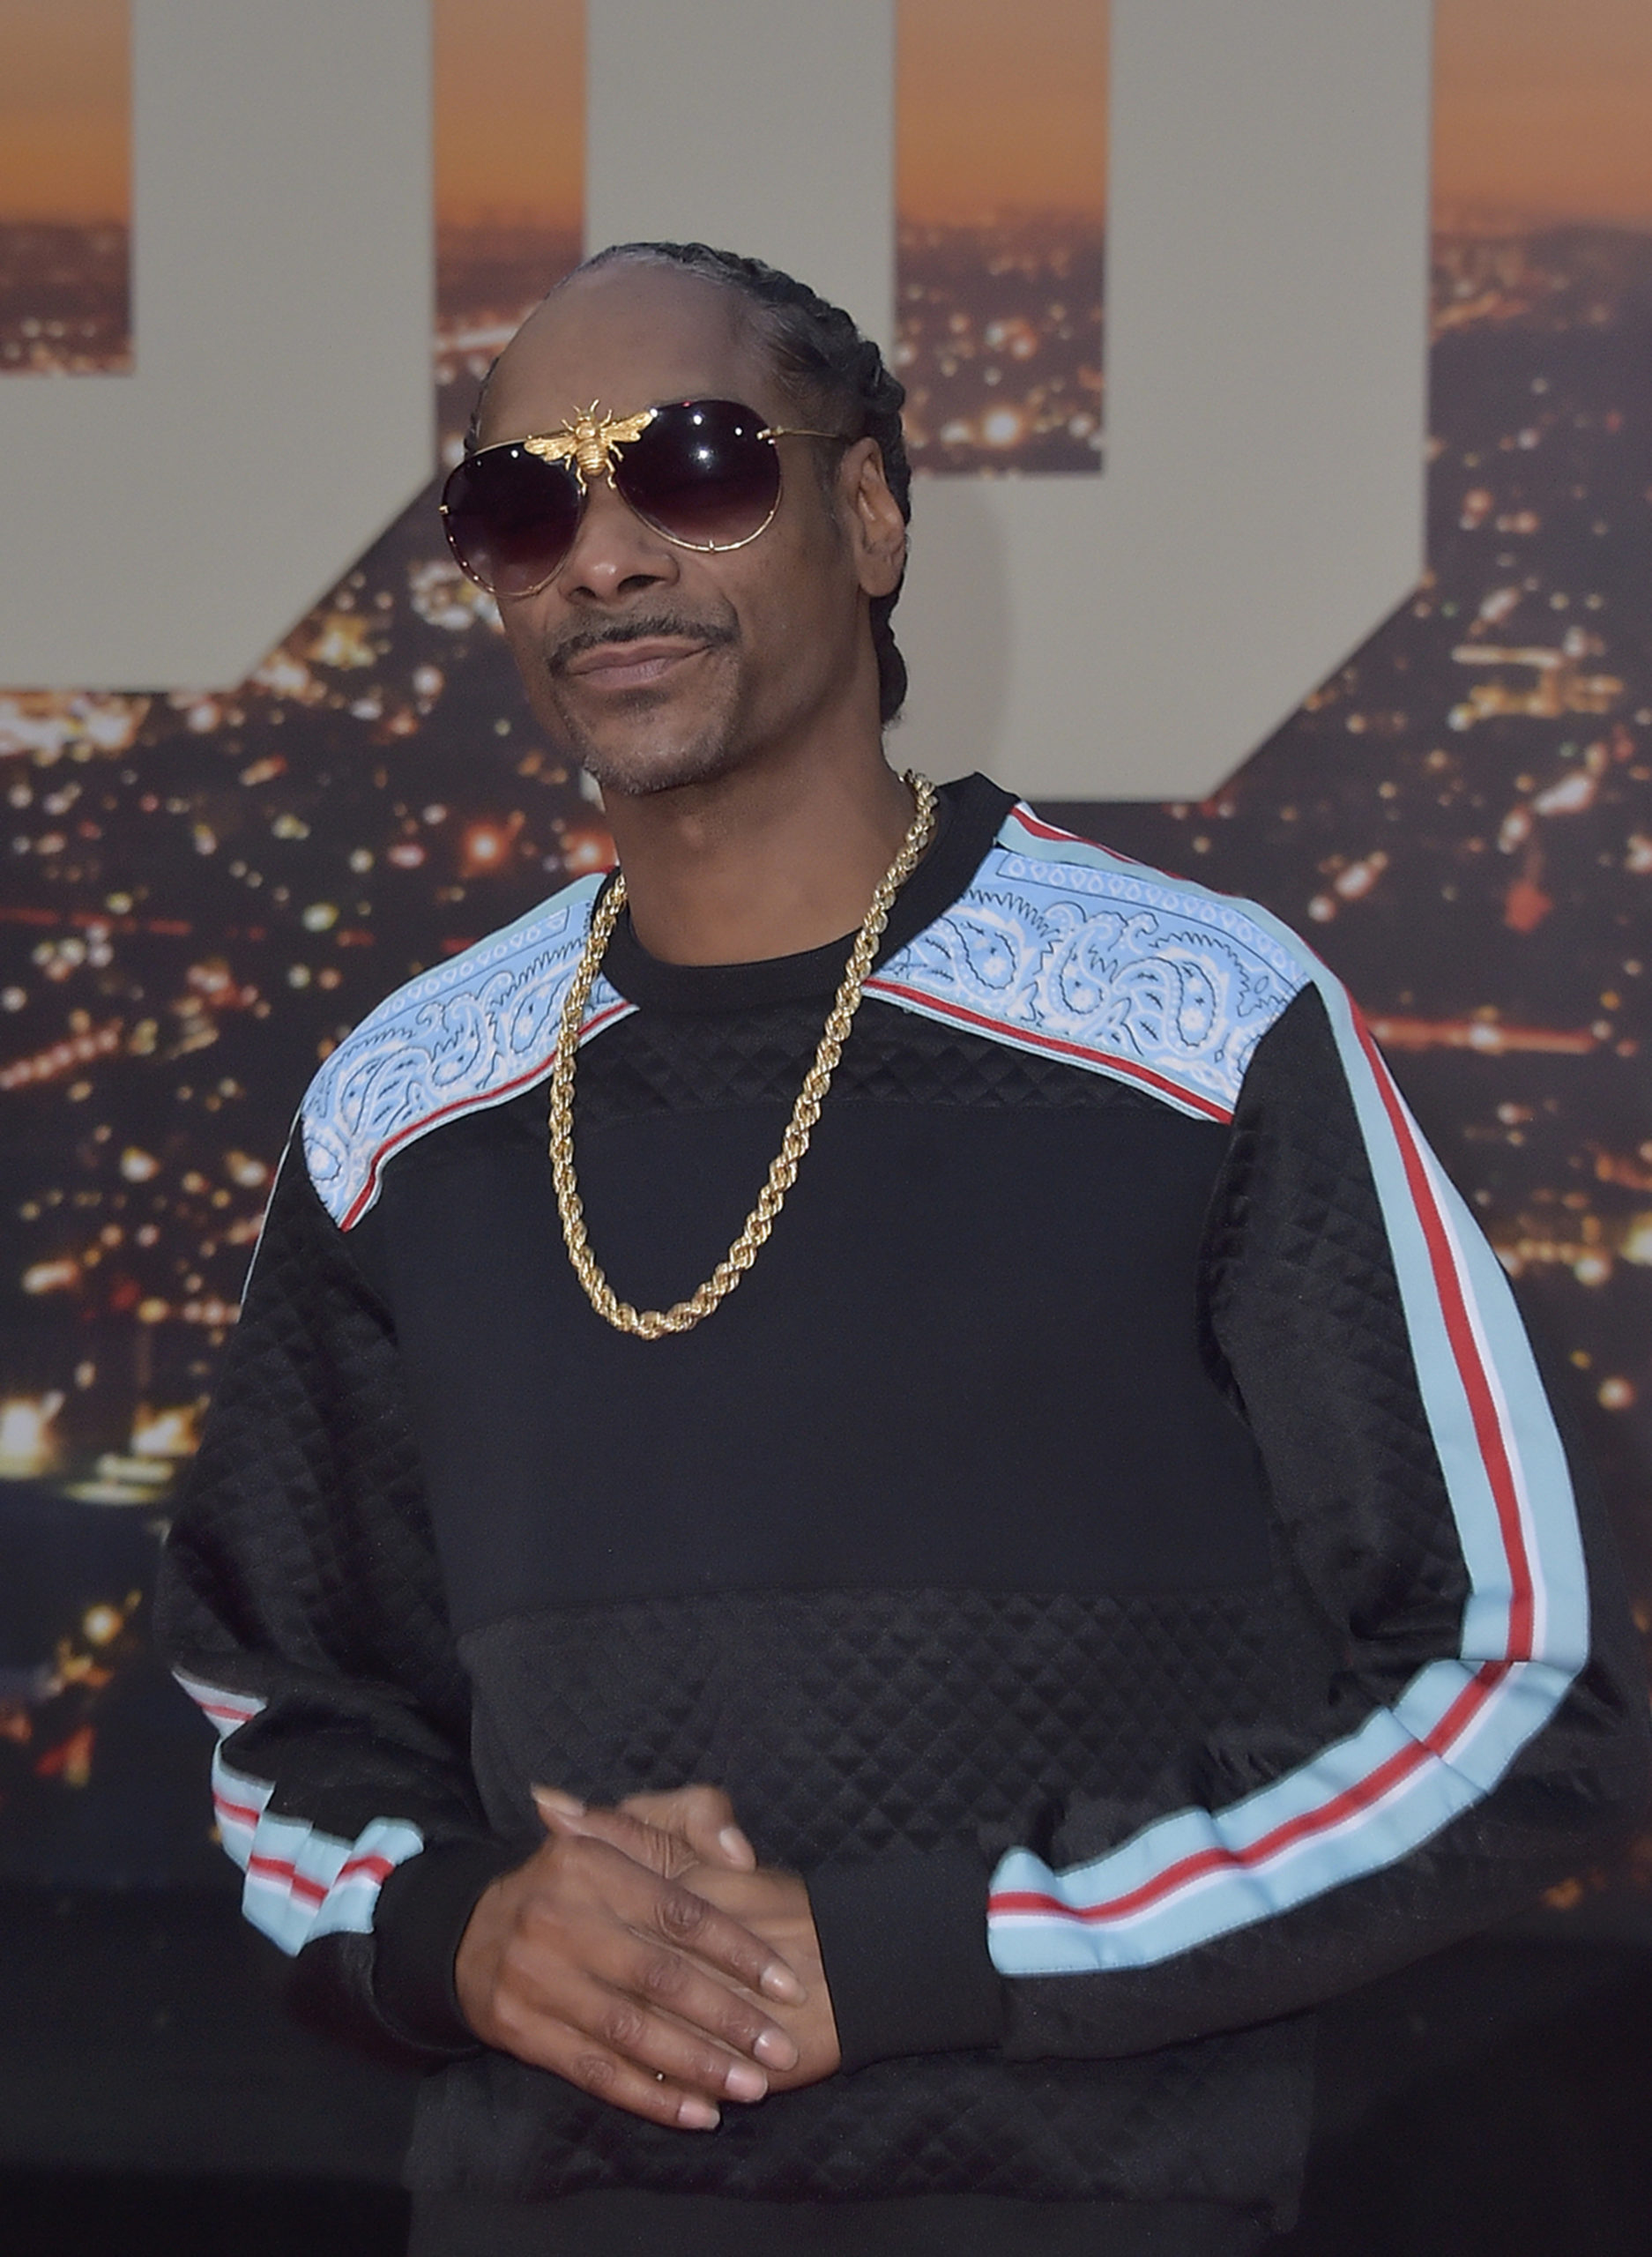 Snoop Dogg Was Arrested For Murder Before Becoming A Household Name